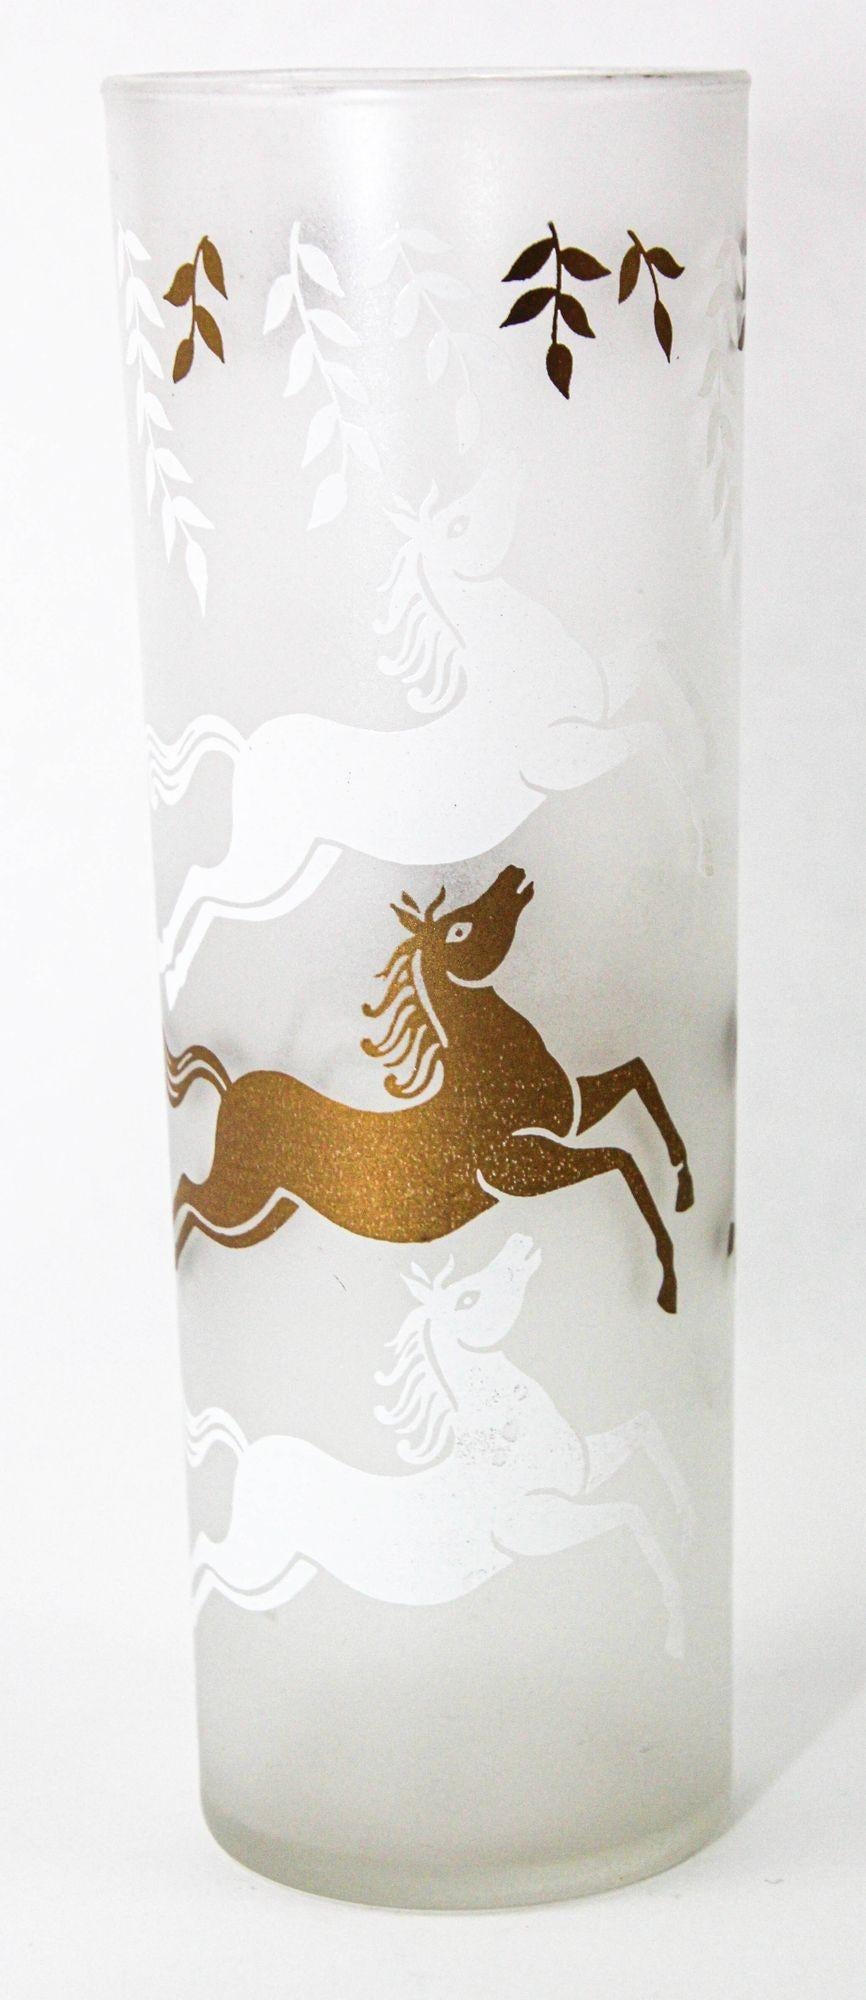 Equestrian Frosted and Gold Drink Glasses Cavalcade by Libbey Galloping Horses For Sale 2